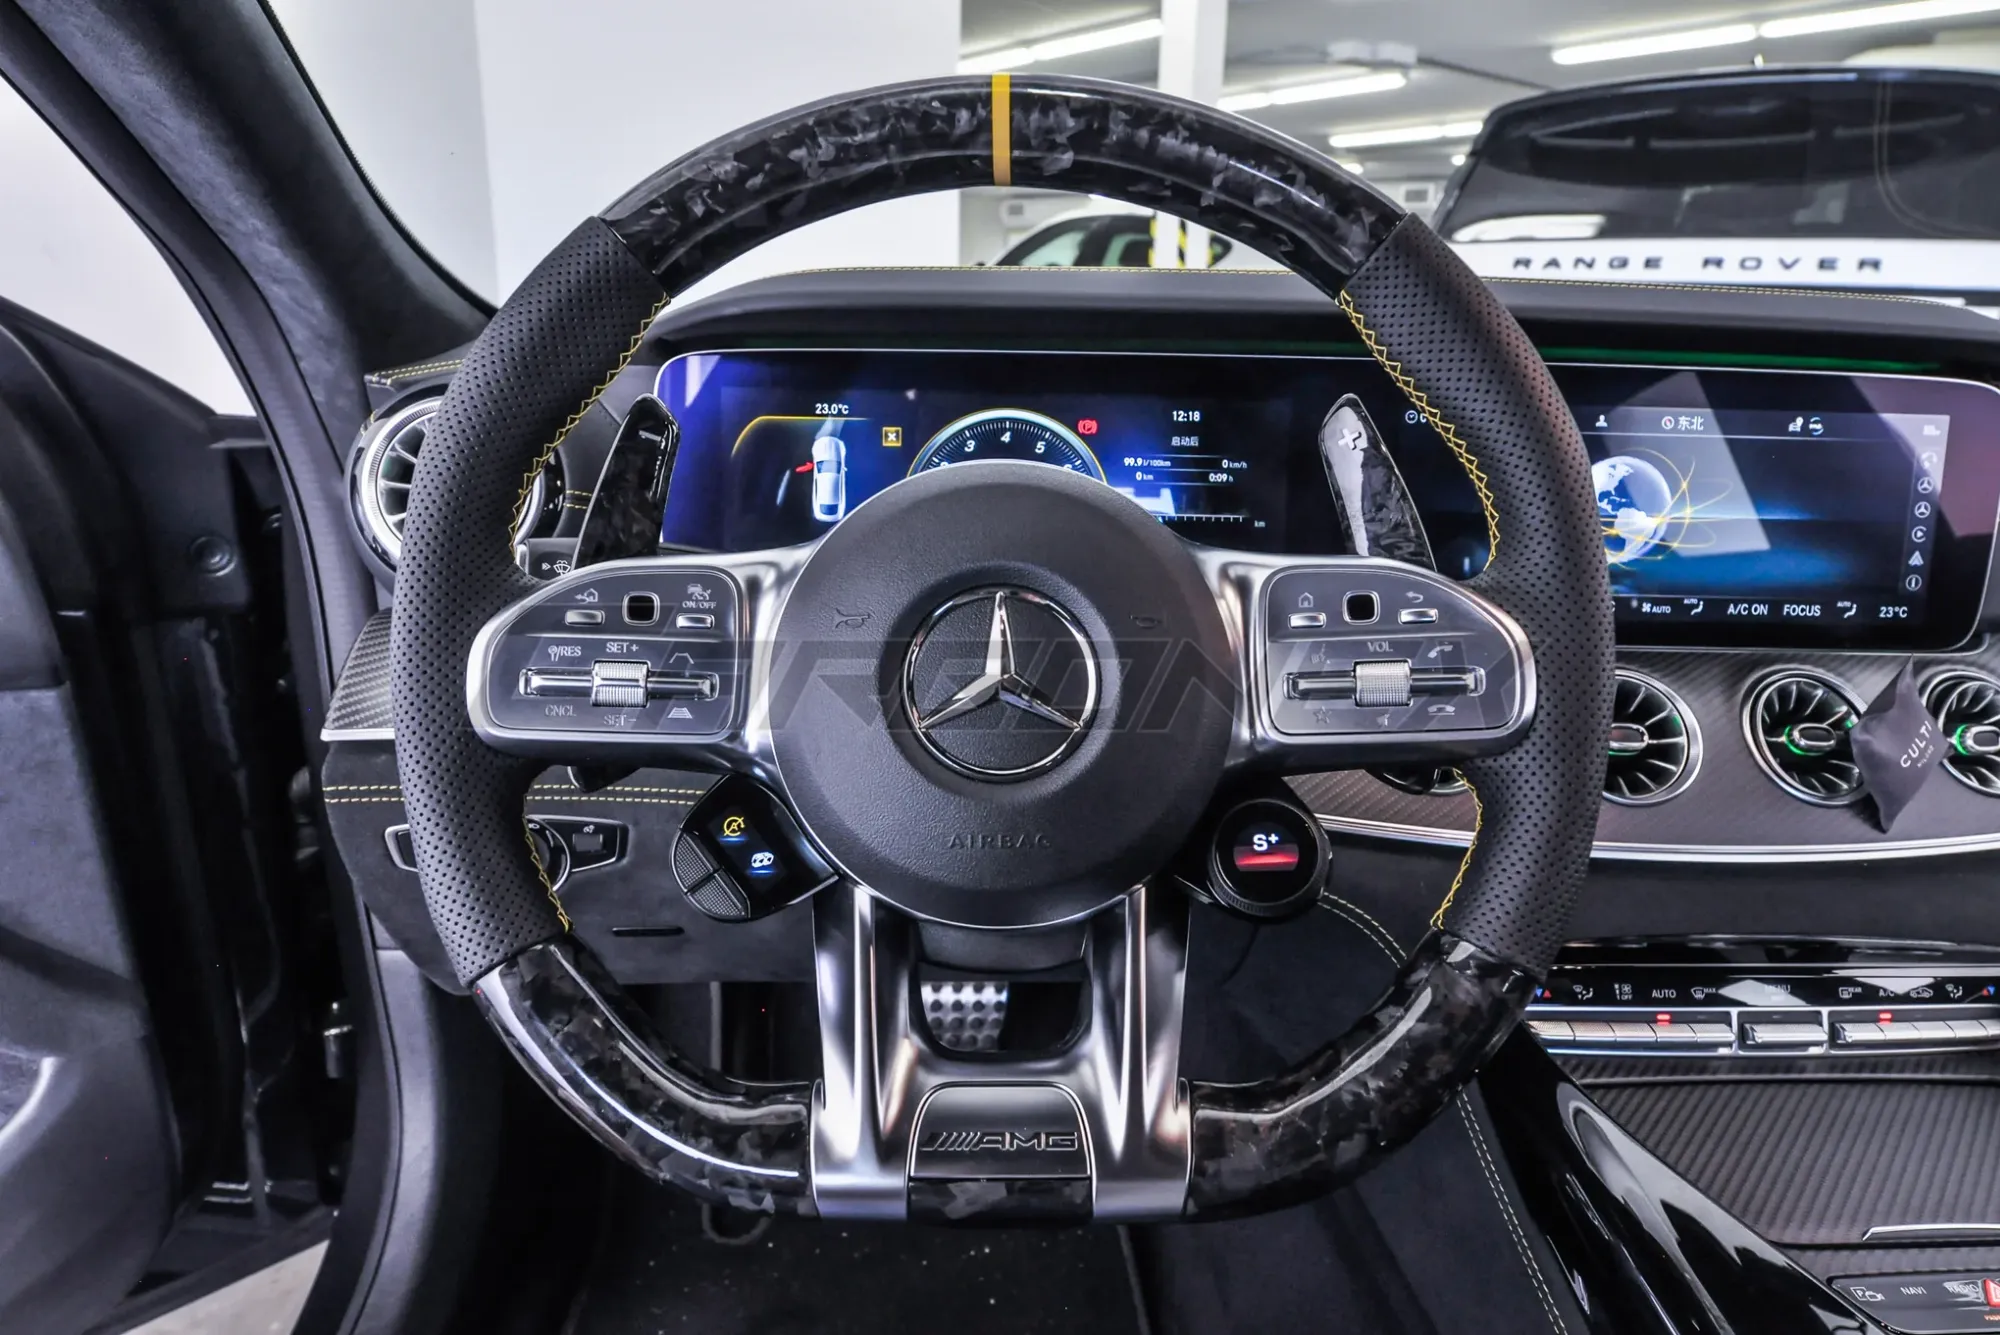 Enjoy Comfort and Control with Tosaver's Luxury Mercedes Benz Steering Wheels